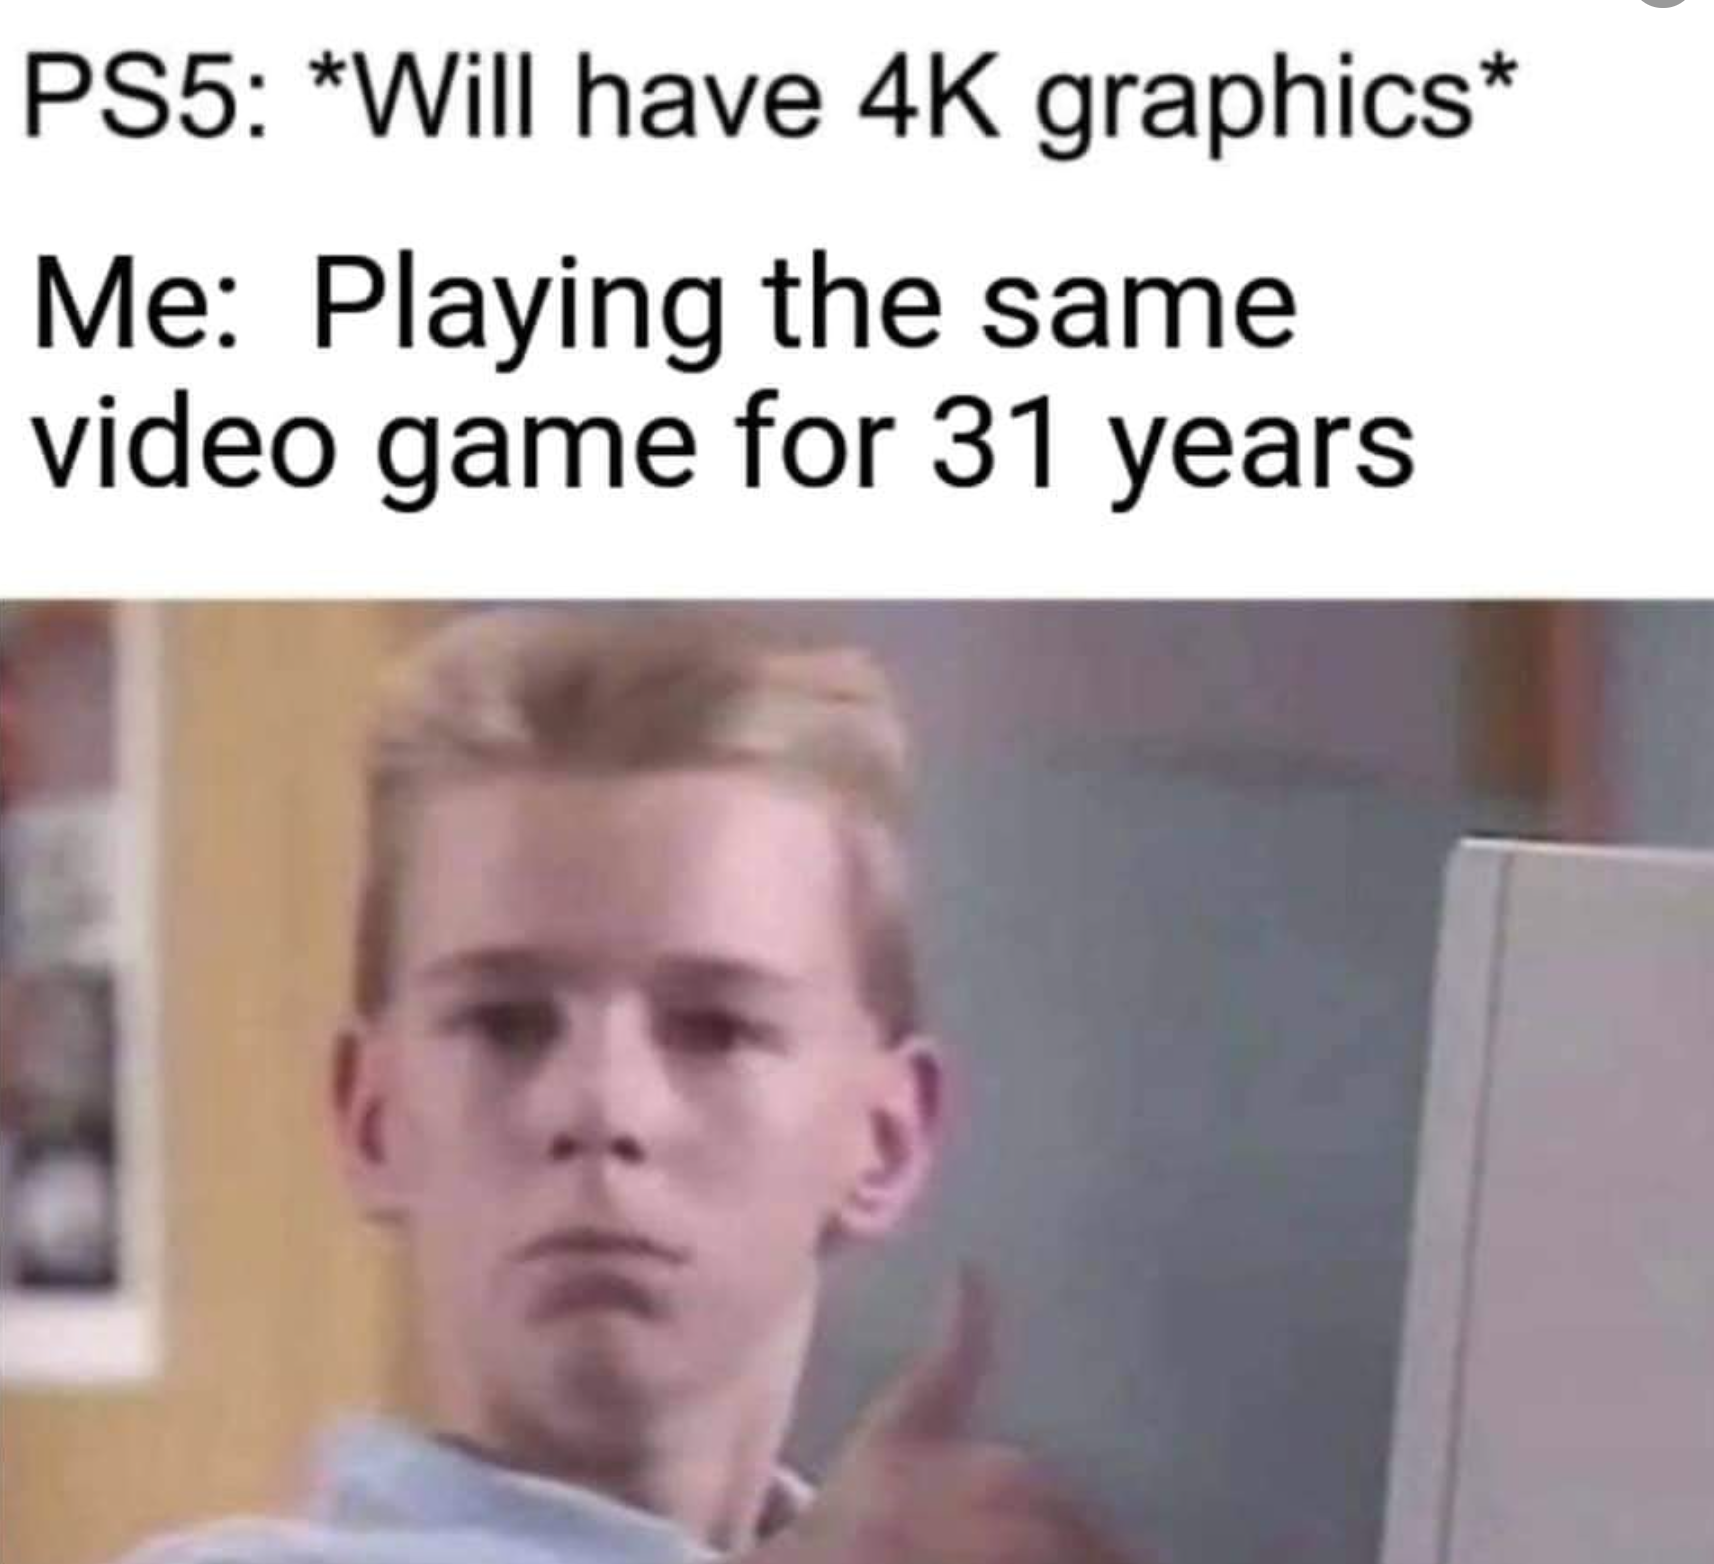 funny gaming memes - head - PS5 Will have 4K graphics Me Playing the same video game for 31 years